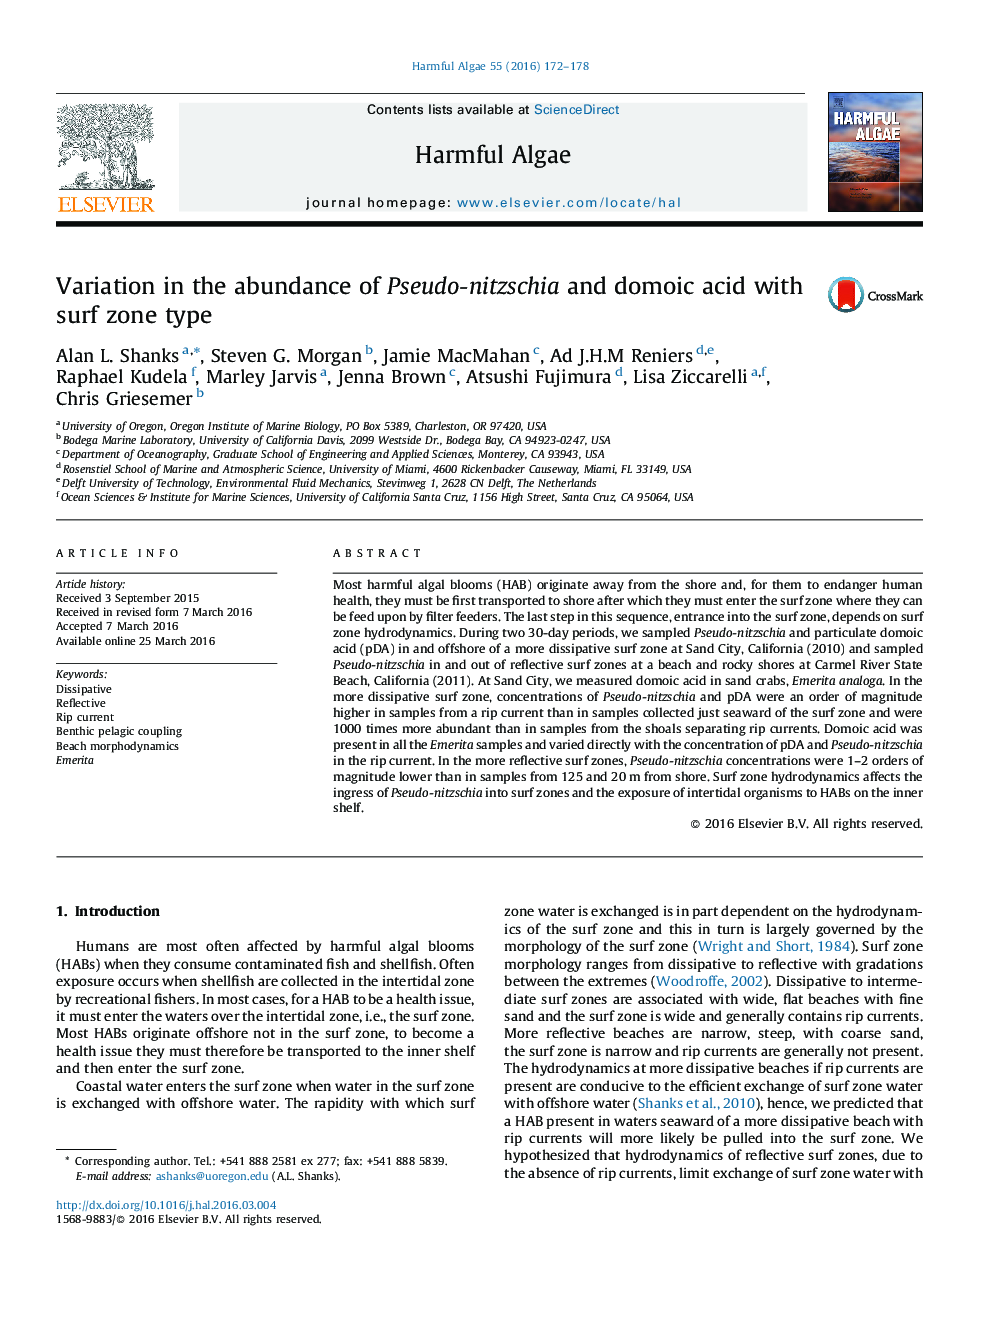 Variation in the abundance of Pseudo-nitzschia and domoic acid with surf zone type